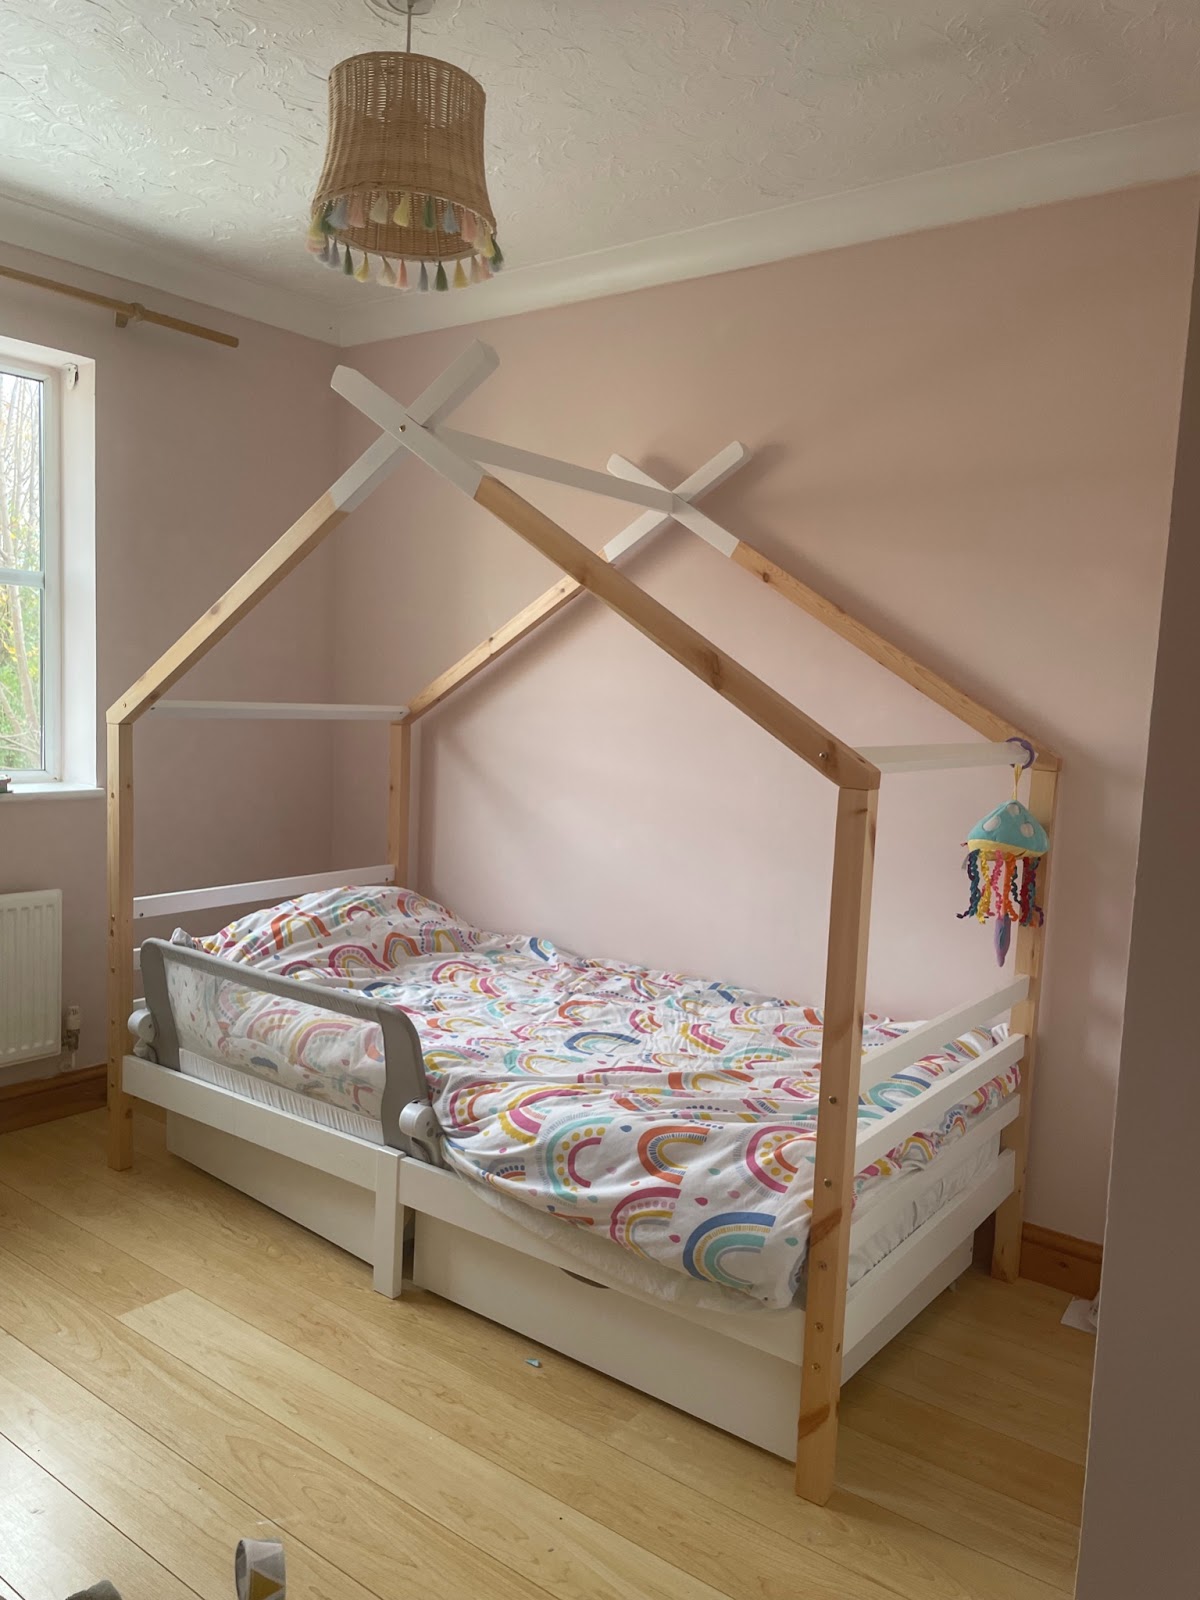 Girls bedroom painted in Lick paint pink 03. Lick paint review.